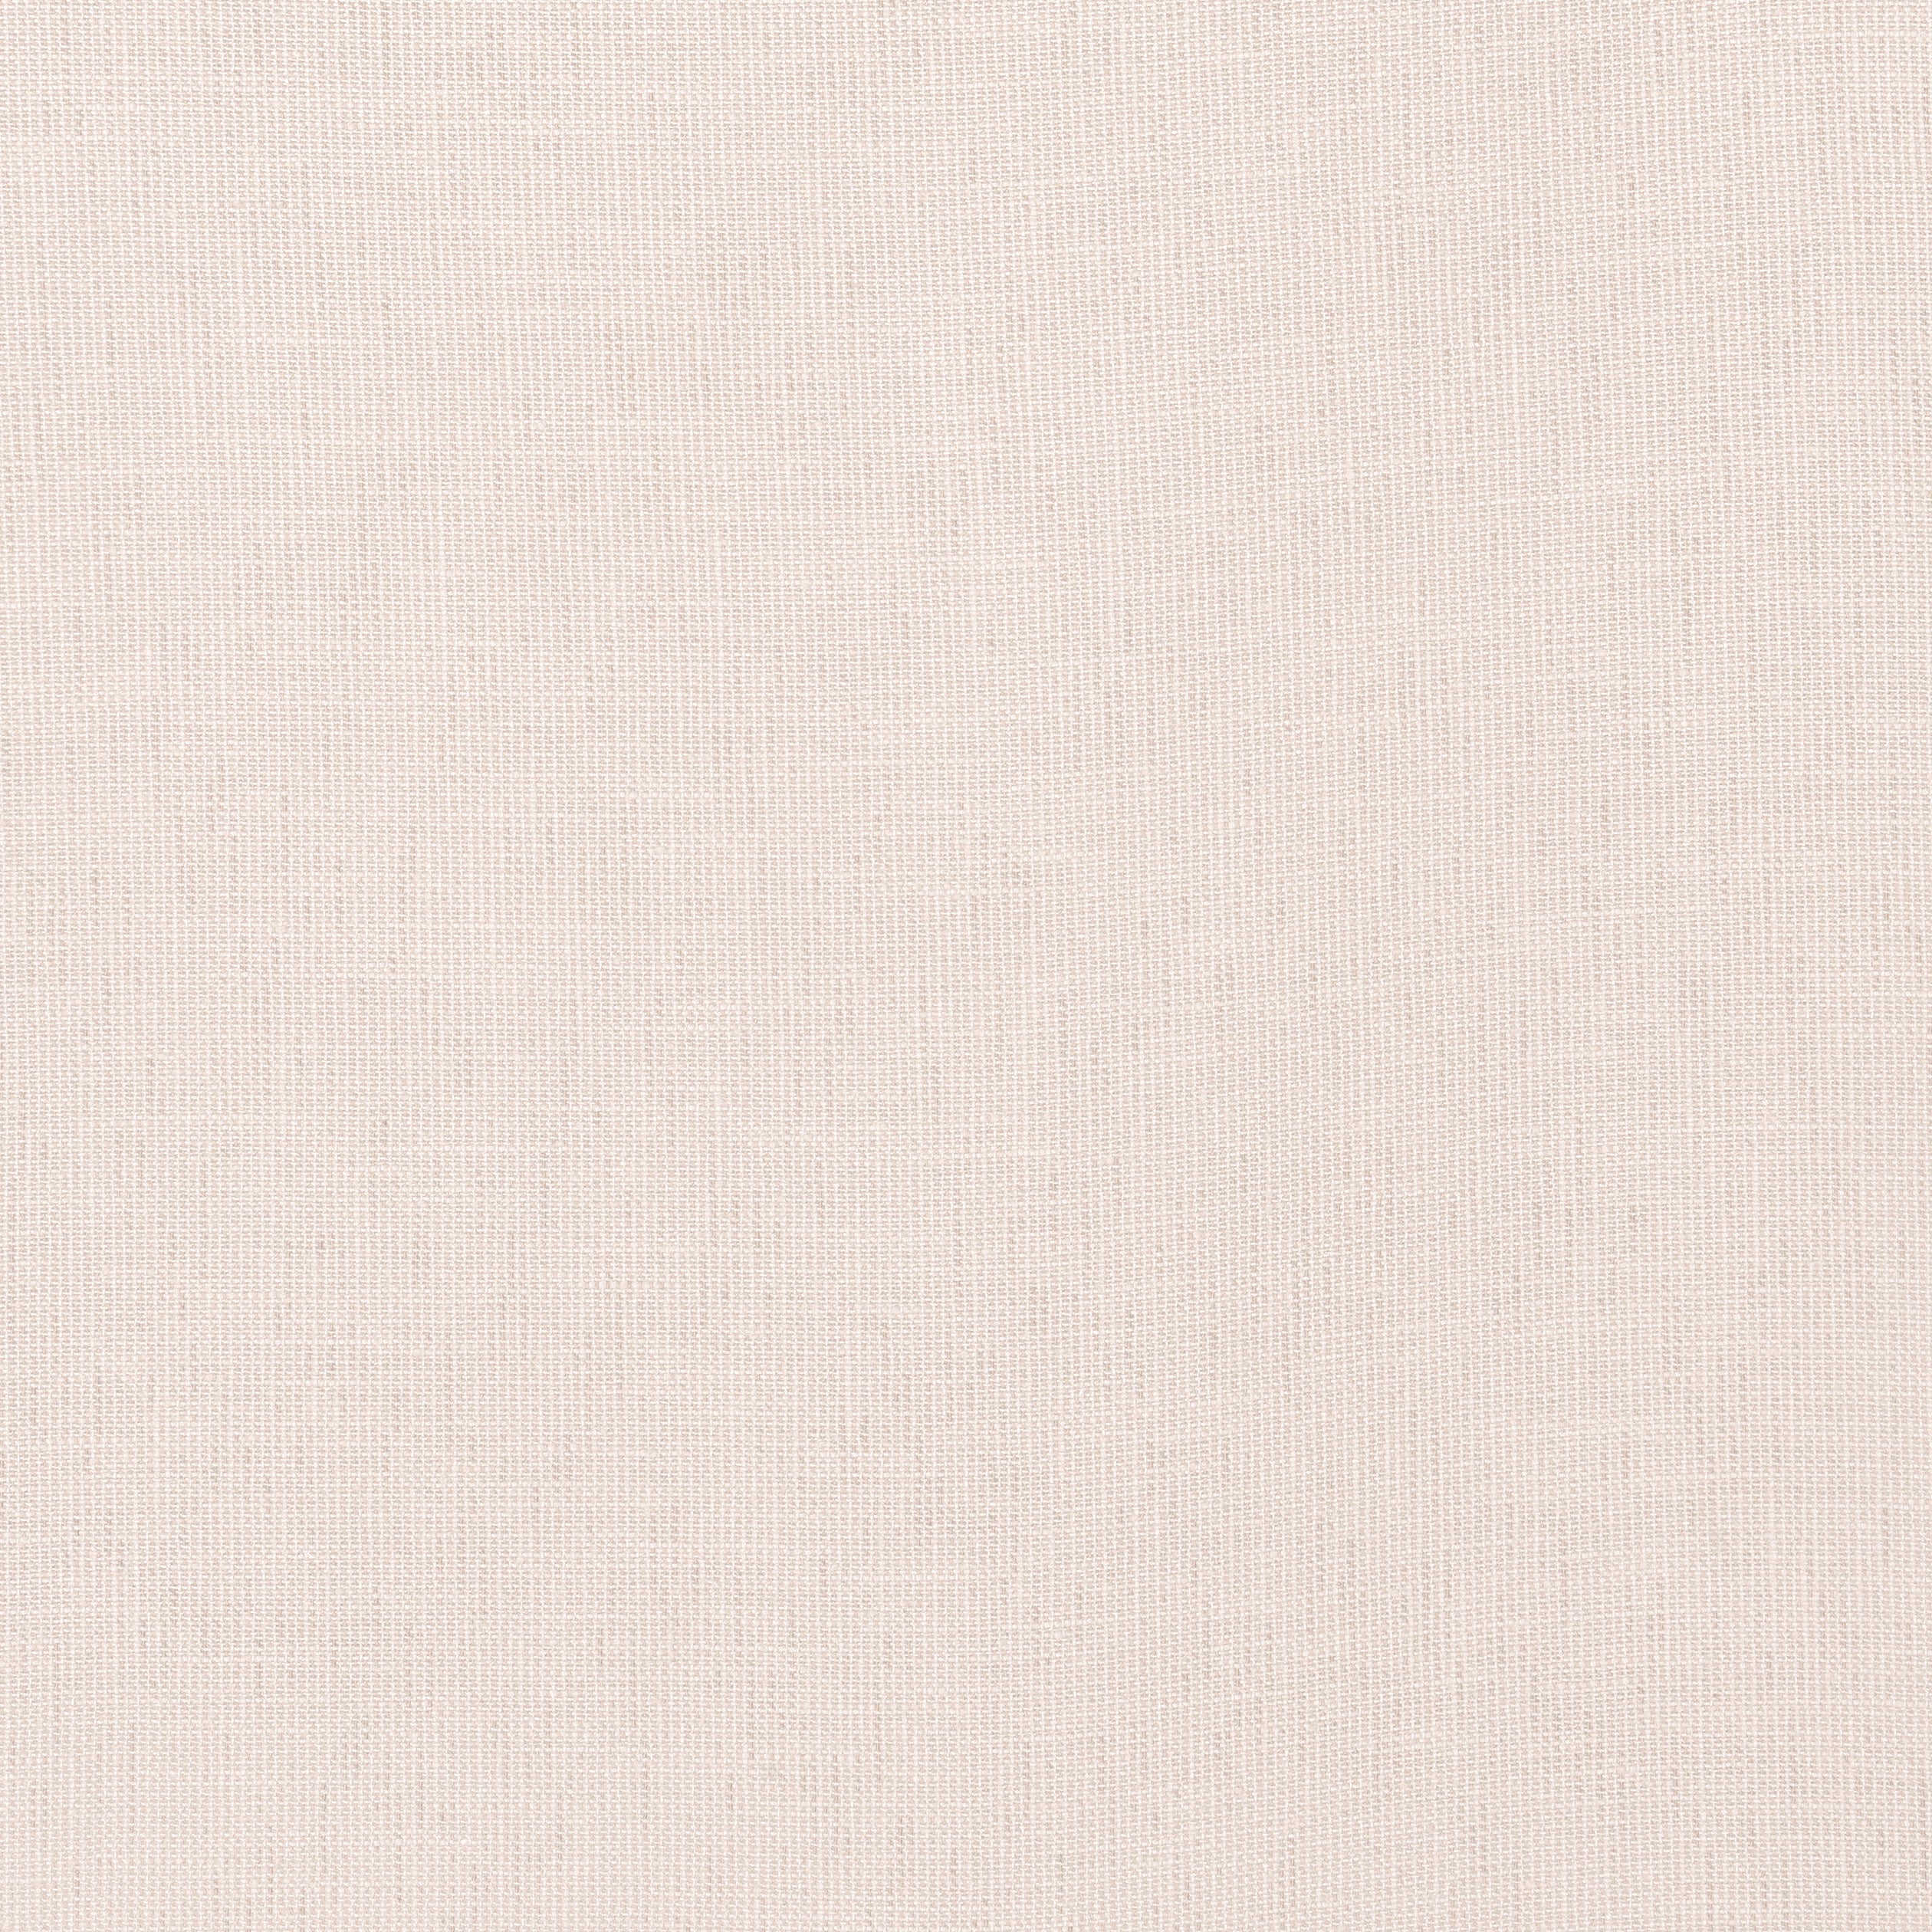 Ottawa fabric in blush color - pattern number FWW8248 - by Thibaut in the Aura collection